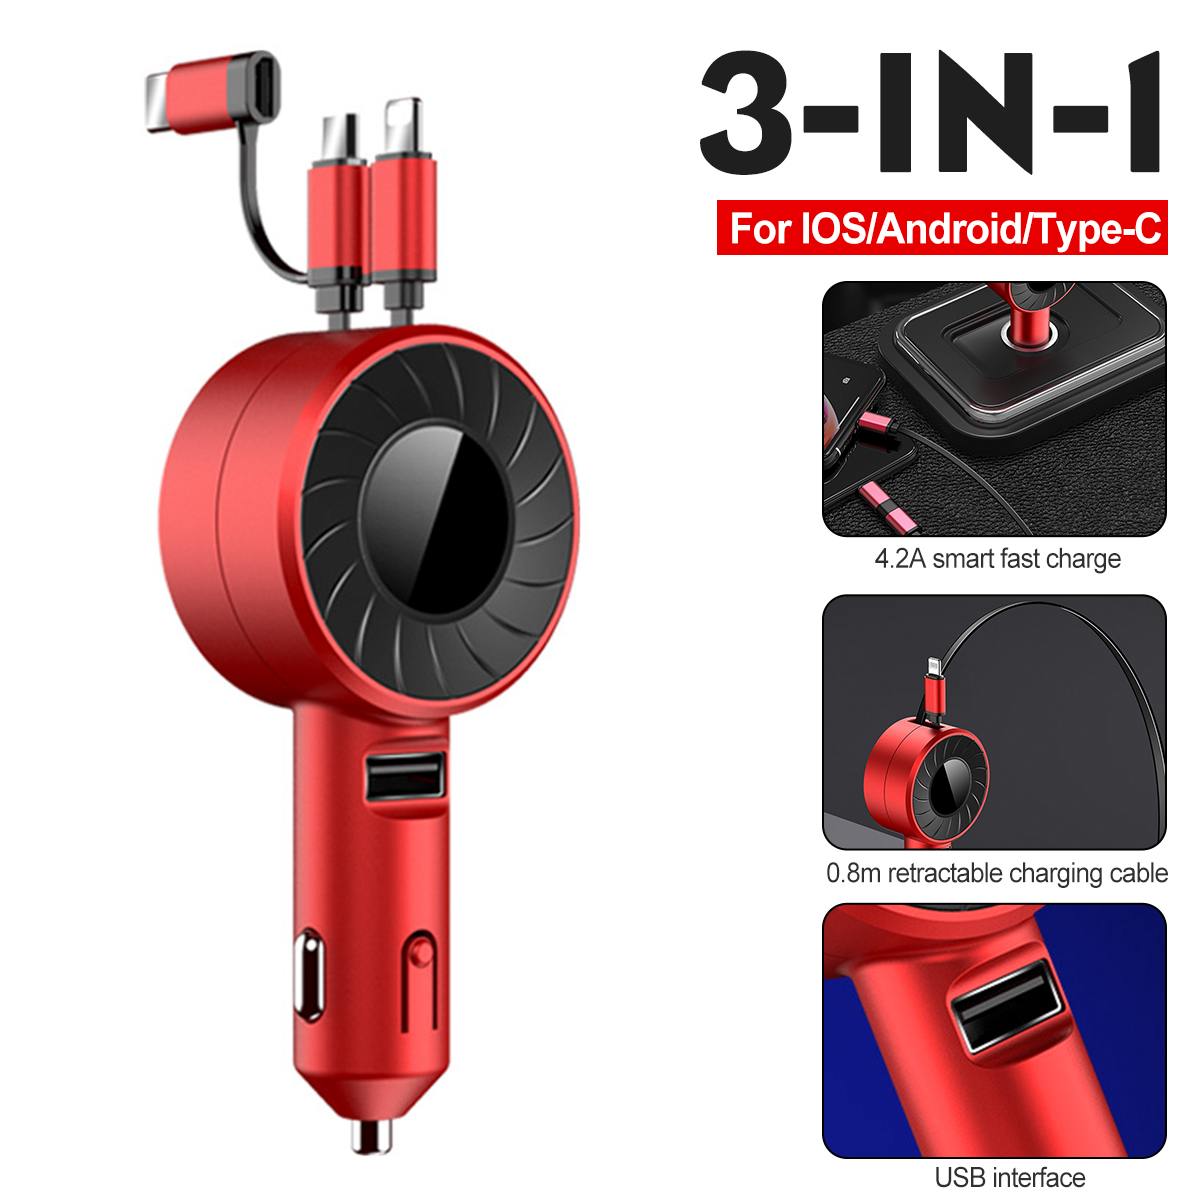 3-IN-1 Car Charger Mobile Phone  Adapter For IOS/Android/Type-C USB Retractable Charging Cable 4.2A Fast Charing For Truck